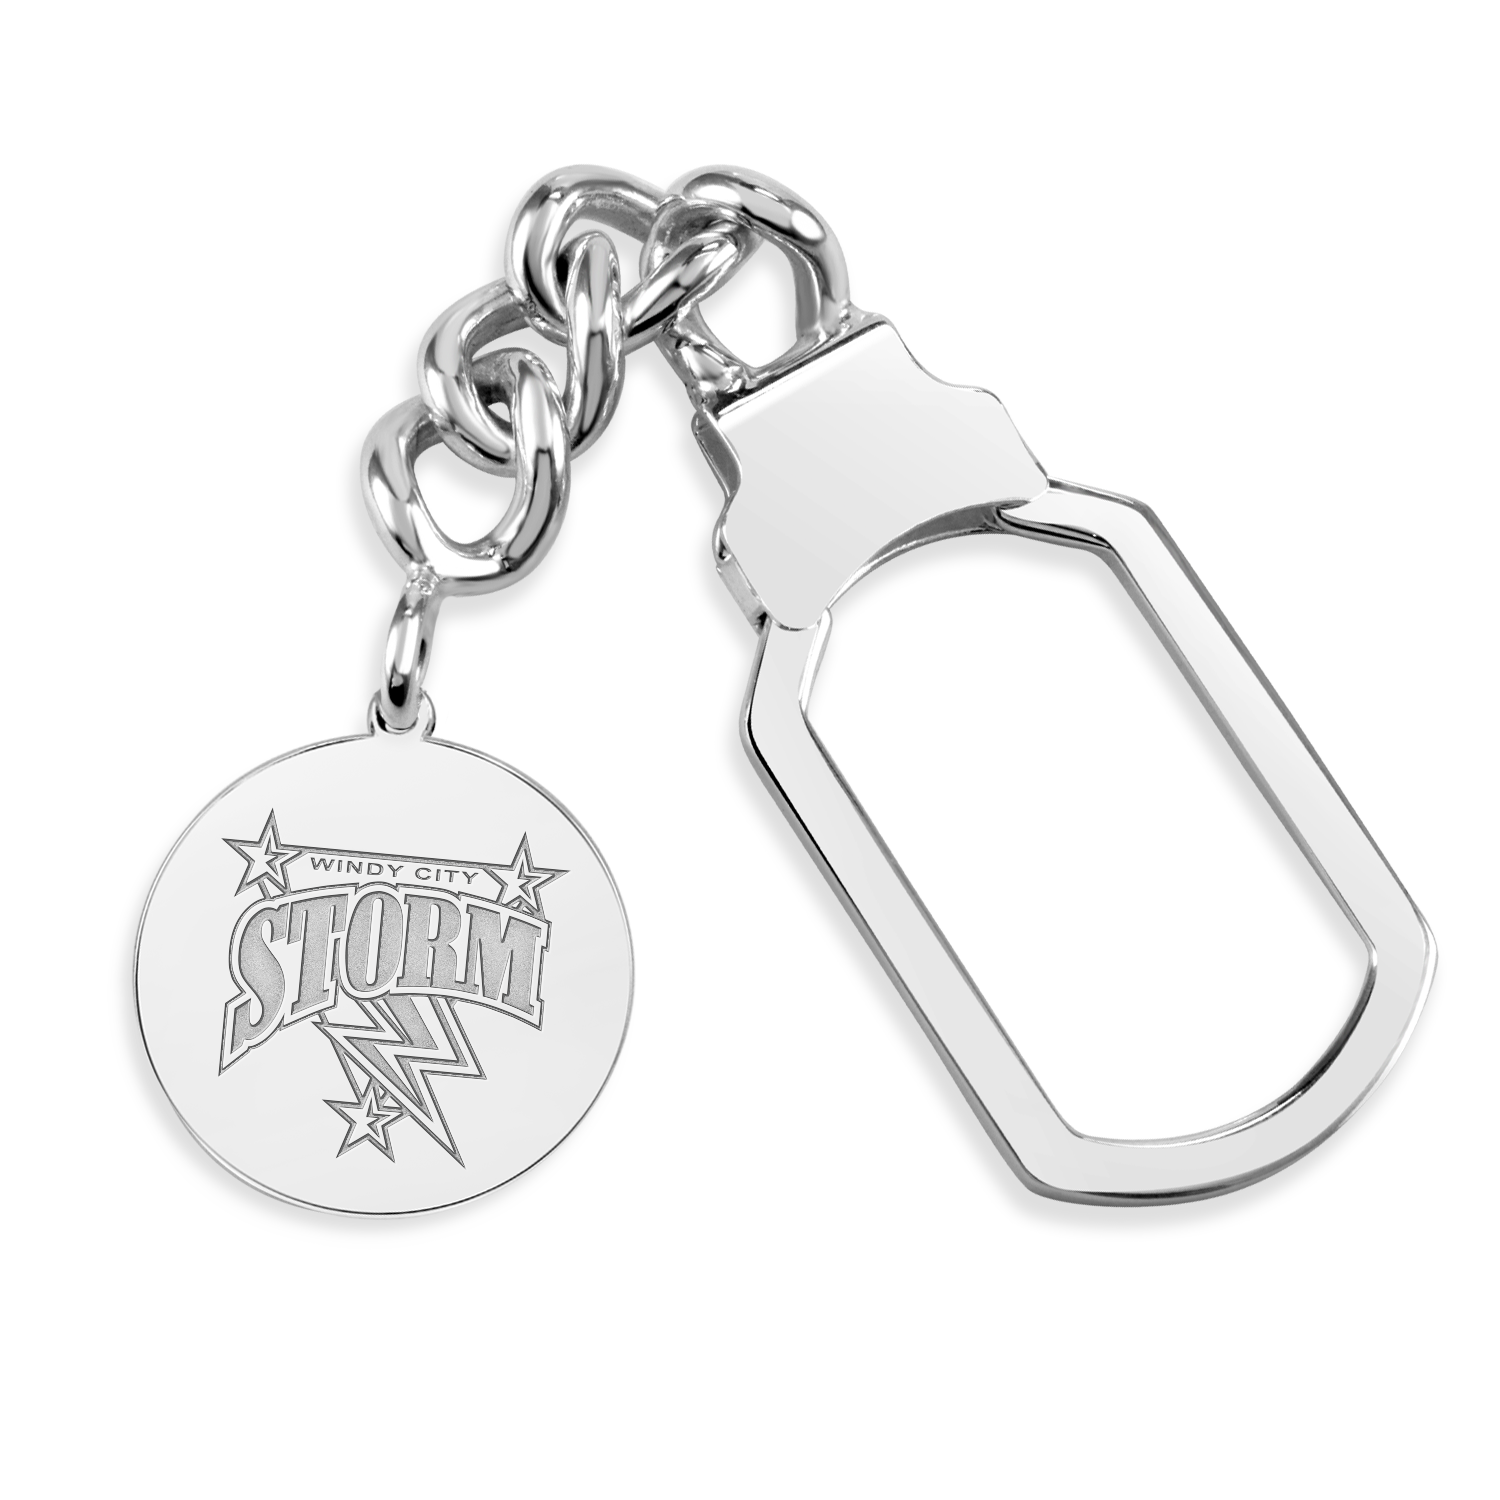 Windy City Storm Disc Tension Key Chain